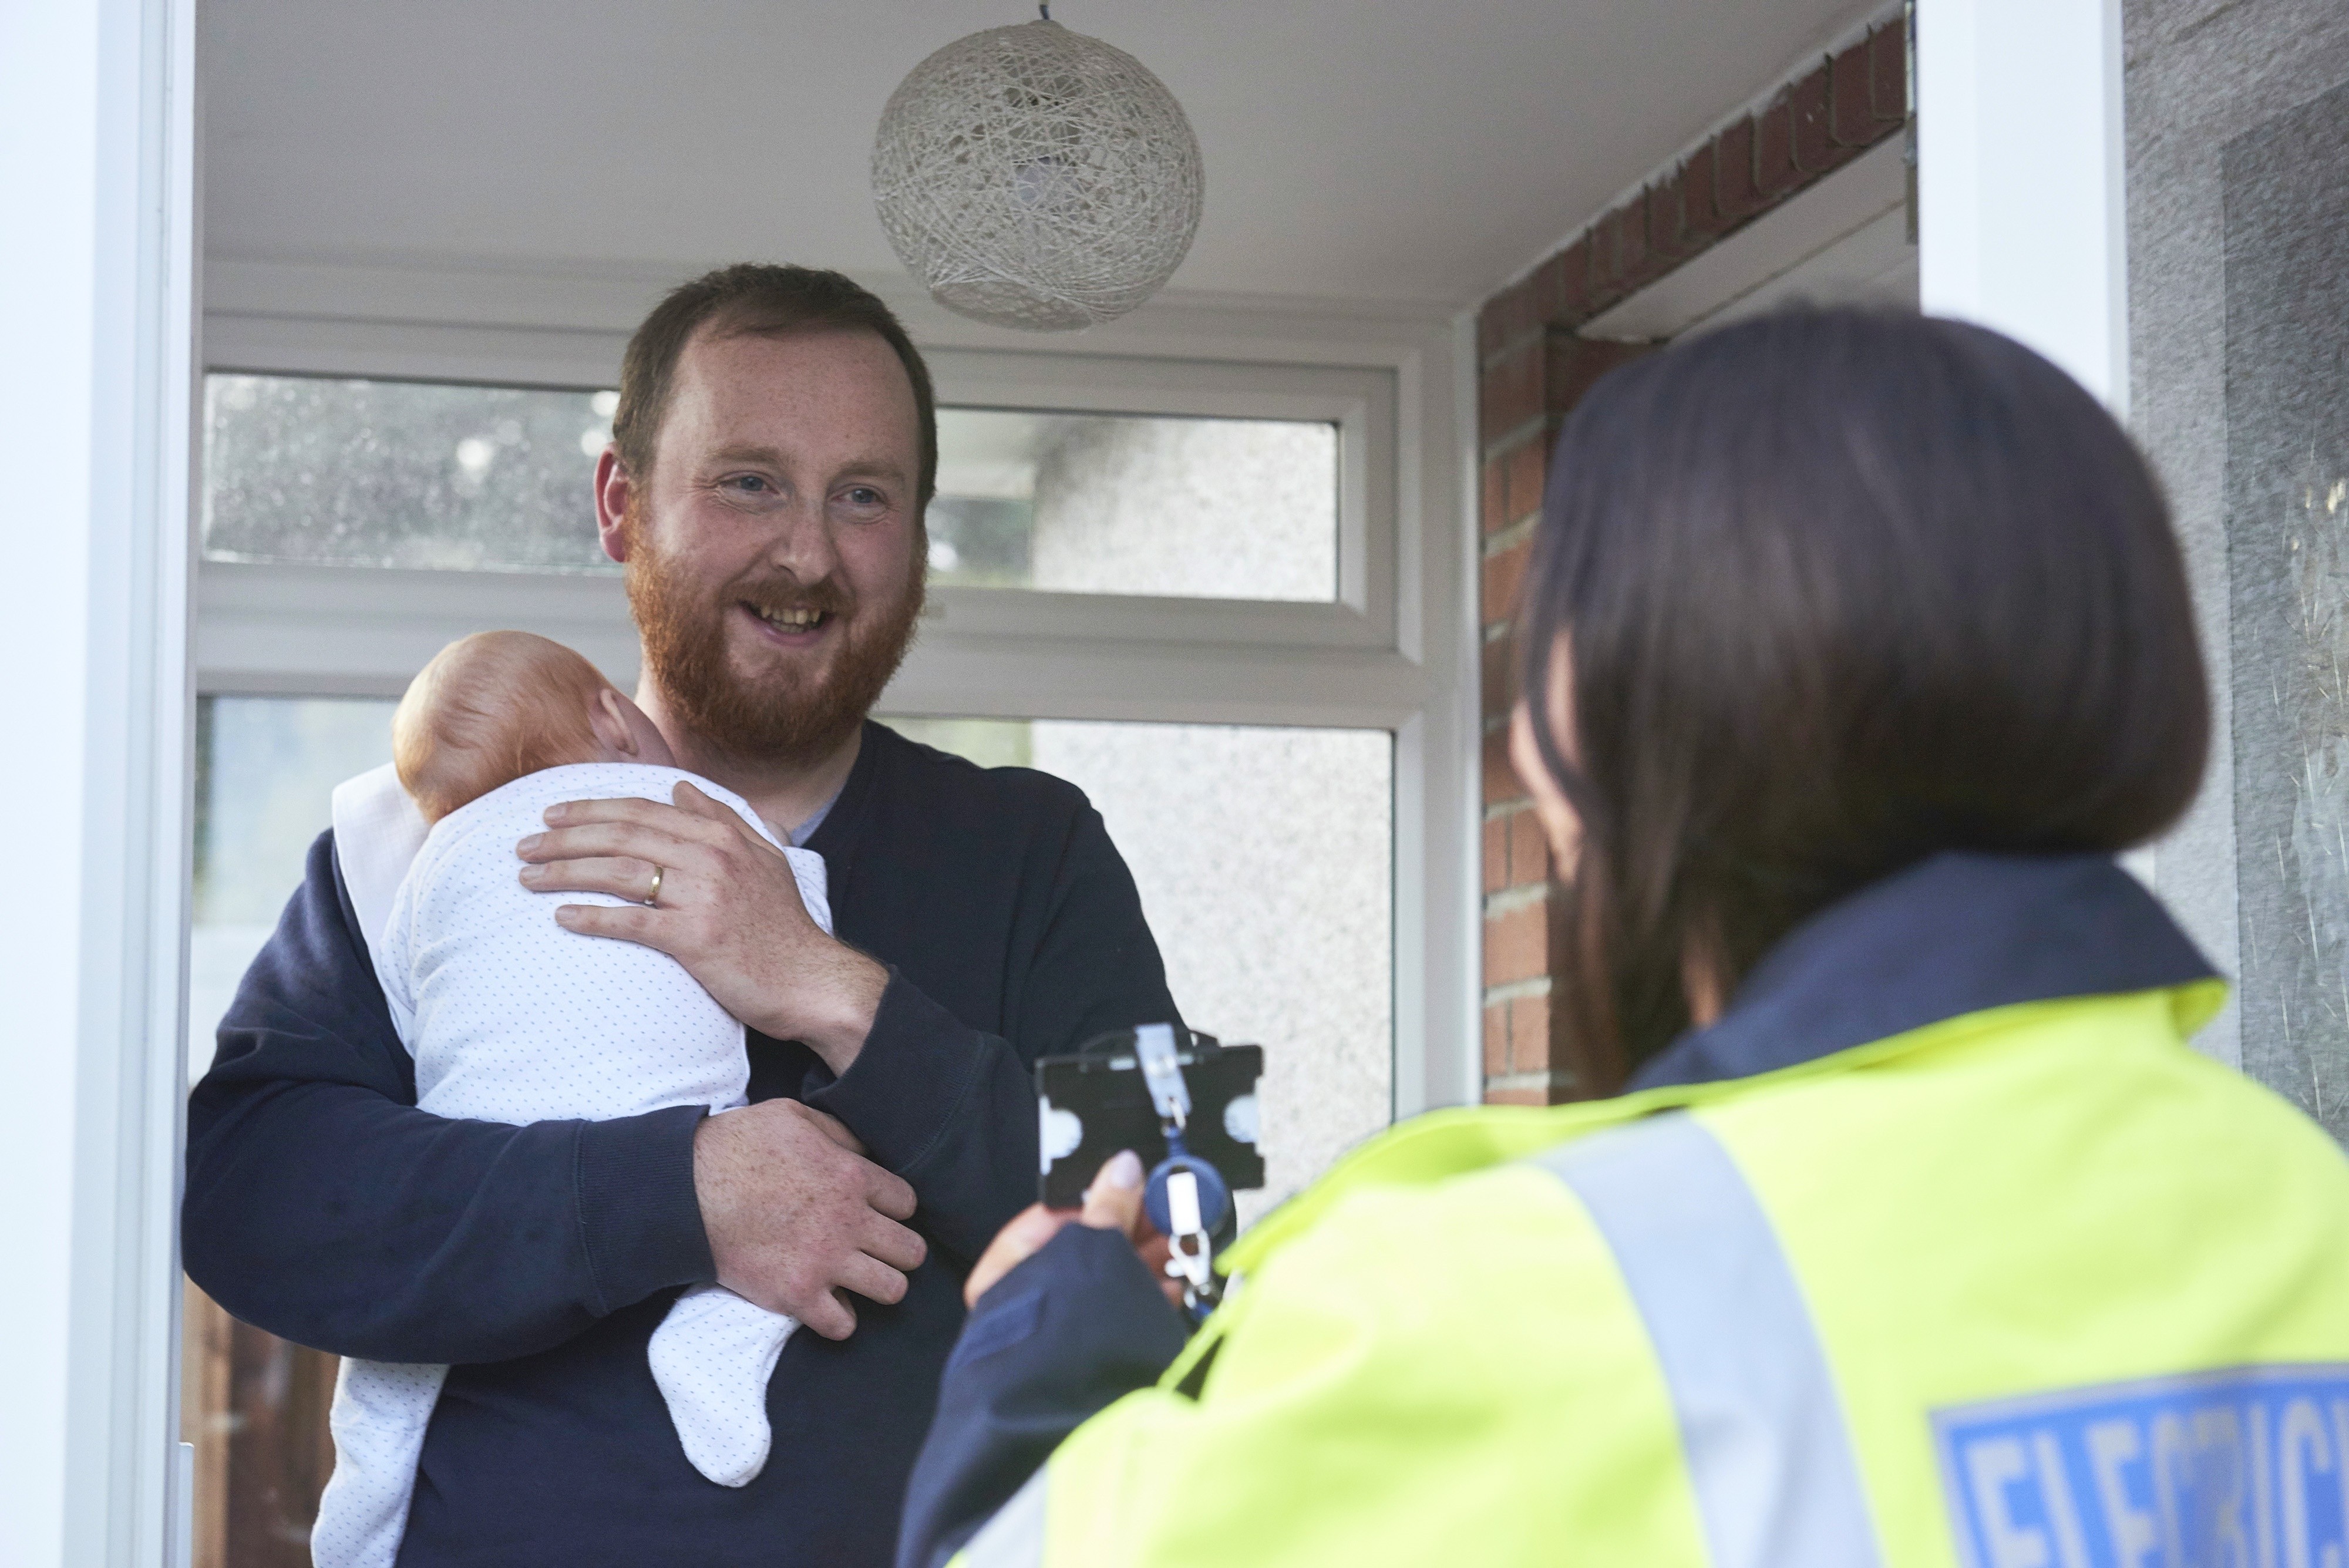 Man holding baby and smiling at woman in high vis jacket